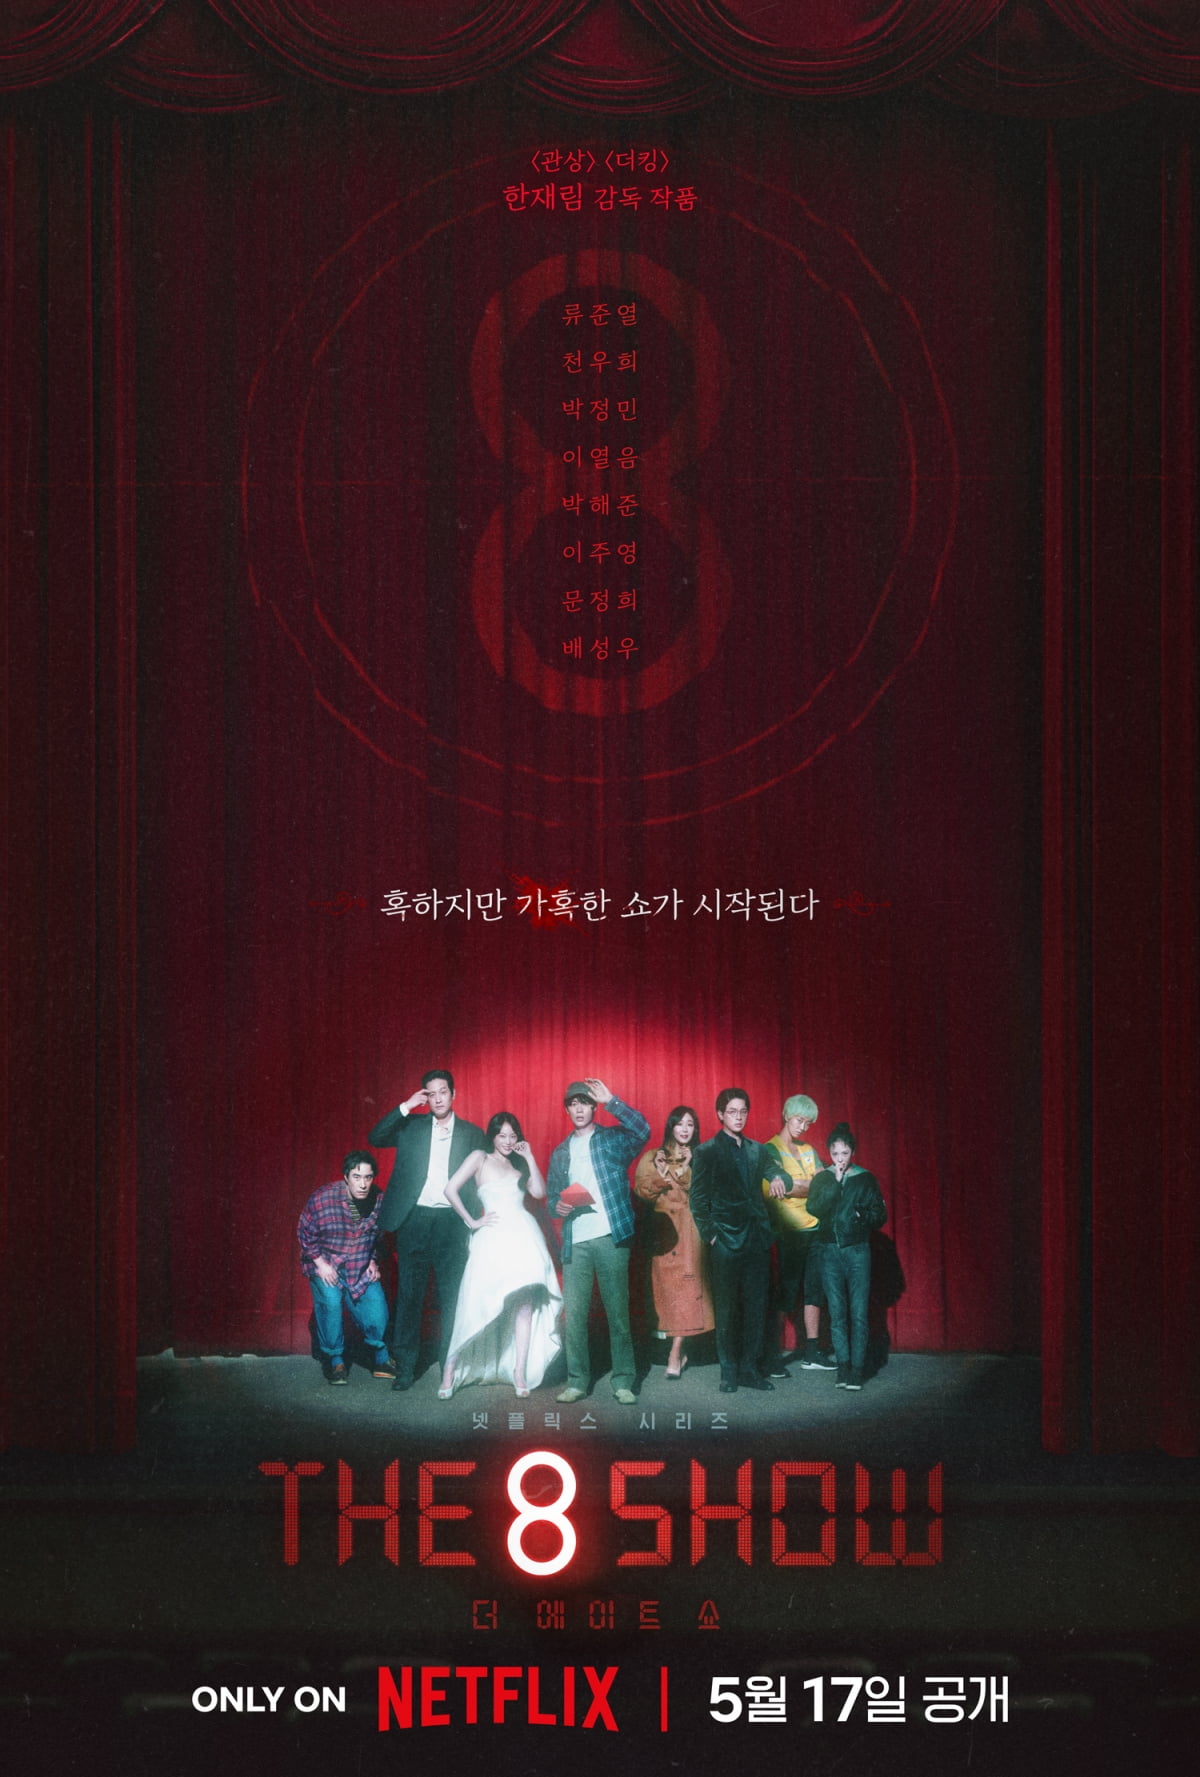 ‘The Eight Show’ to be released on the 17th of next month